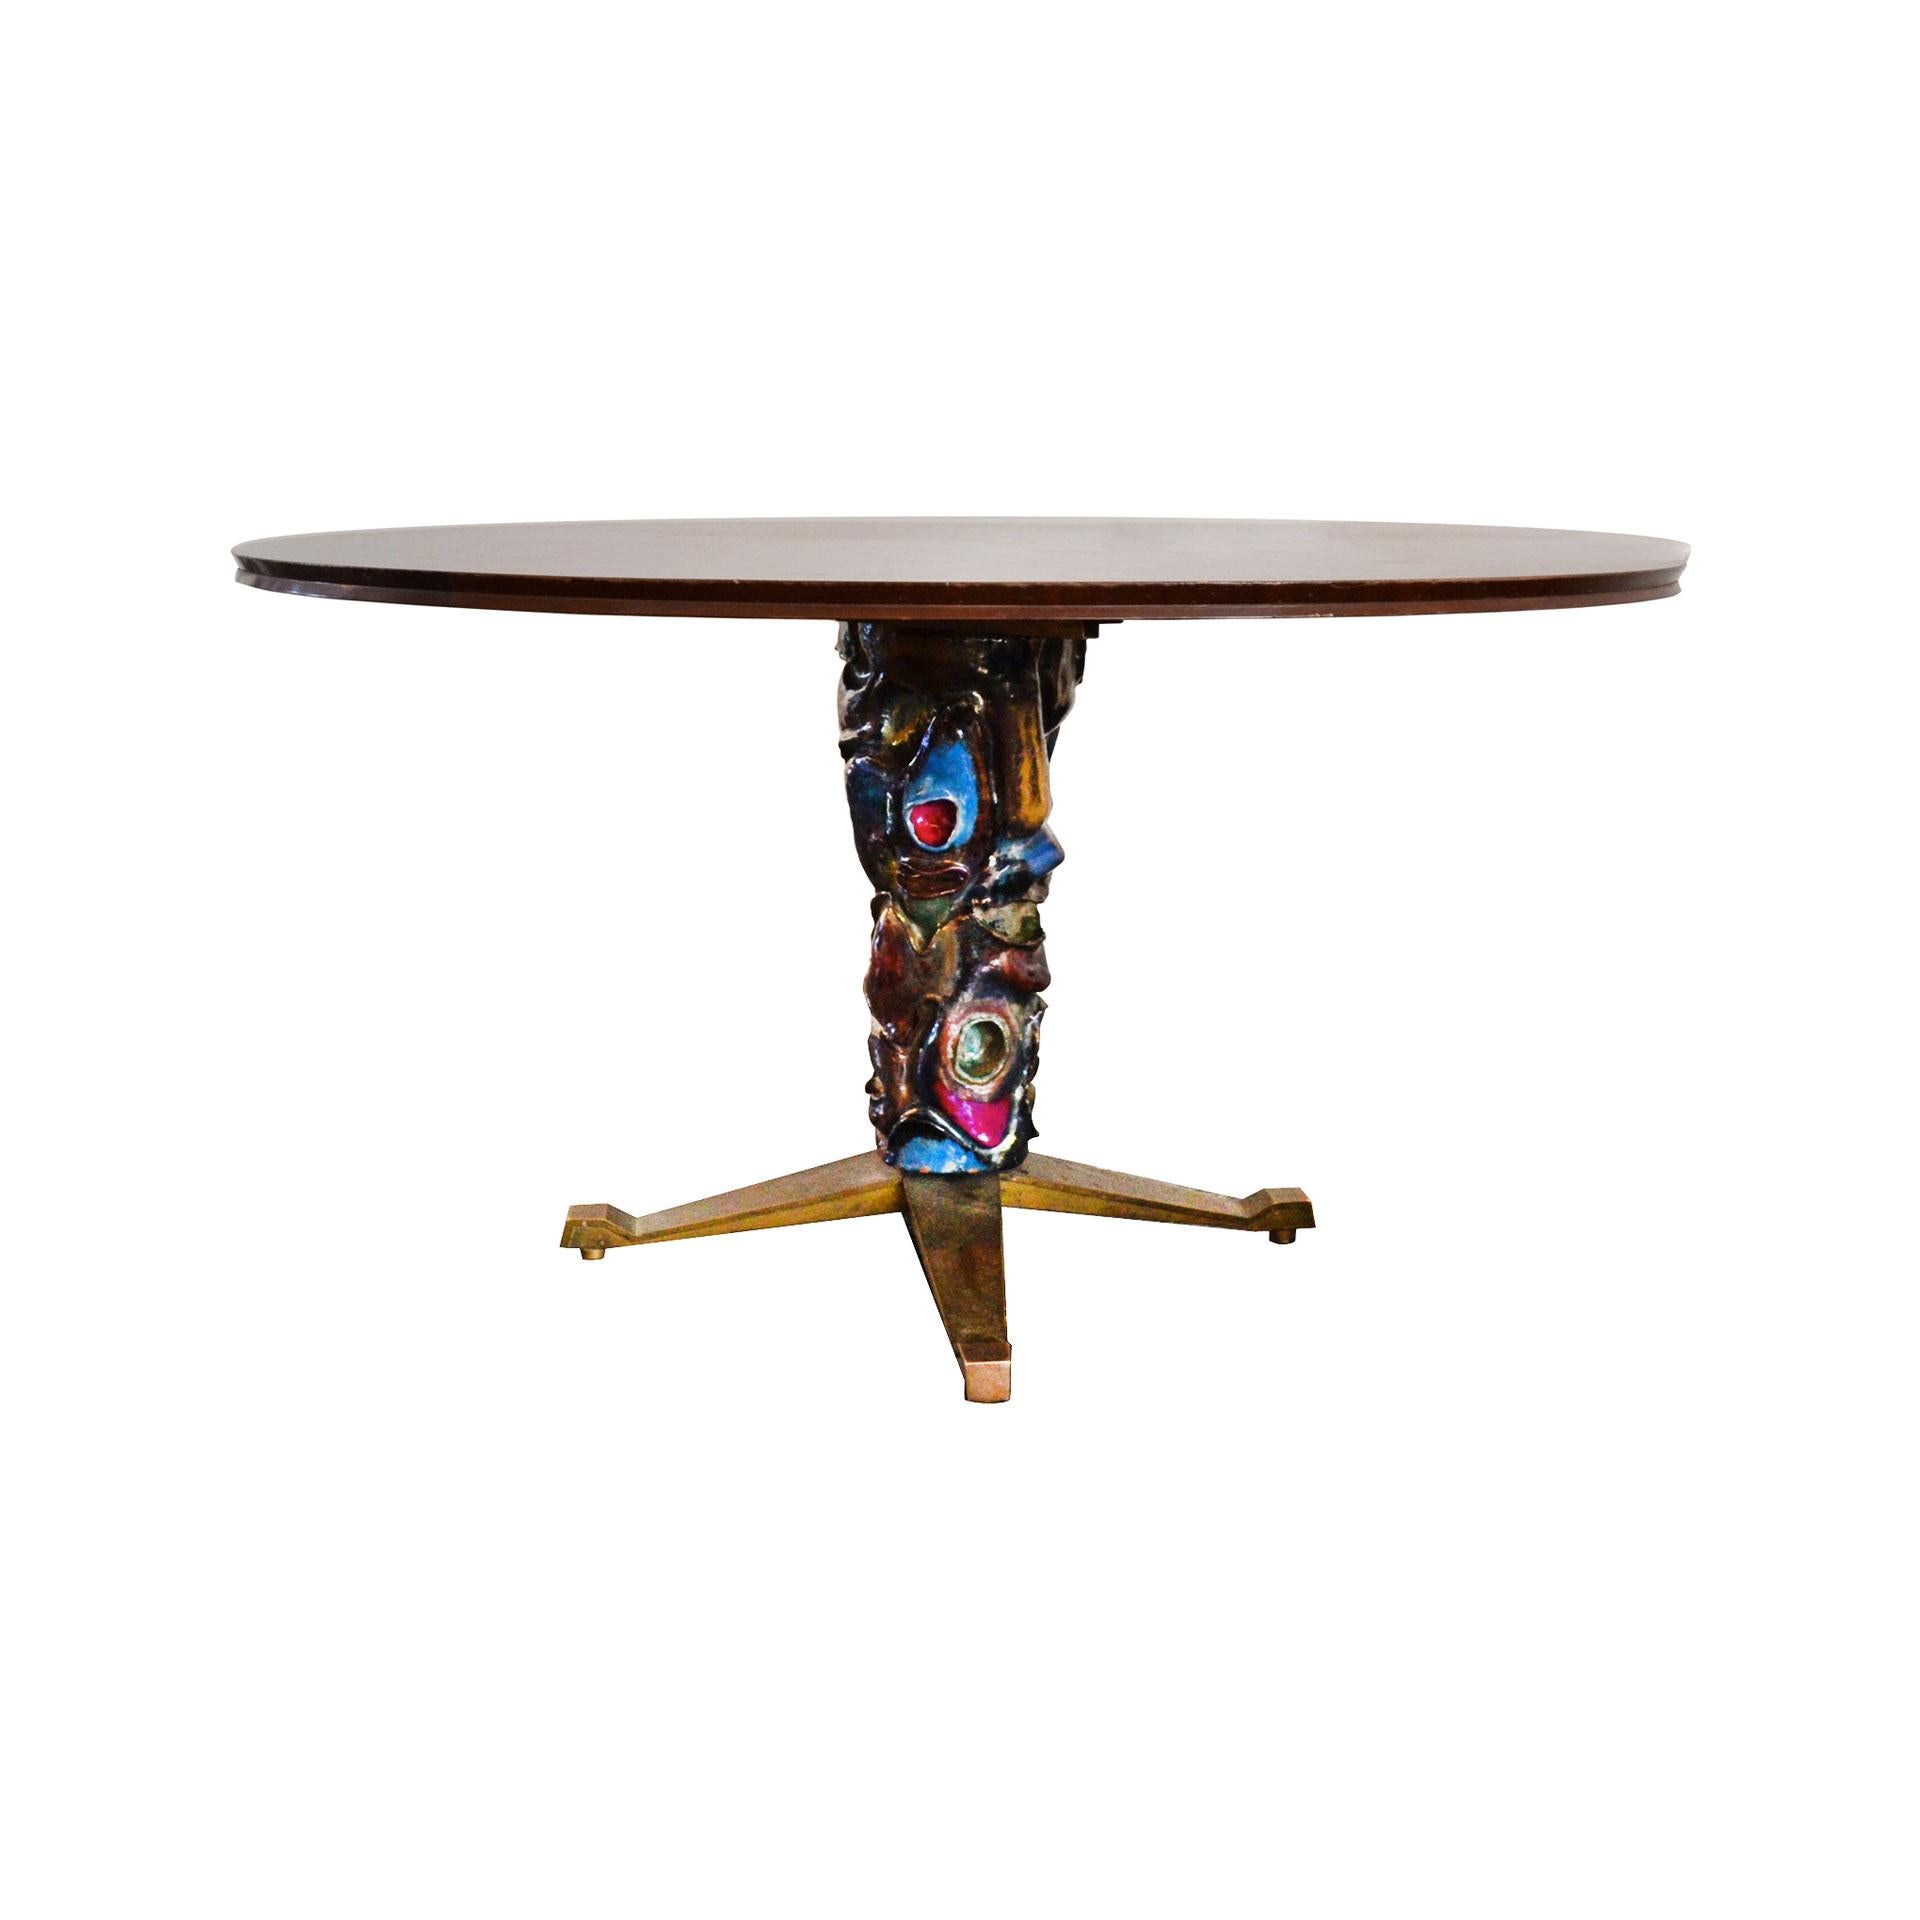 Round wood table designed by the architect Melchiorre Bega and the artist Pietro Melandri as unique piece for a private house in Fregene, Italy. The base of the table has a brass structure covered with special and amazing polychrome ceramic. The